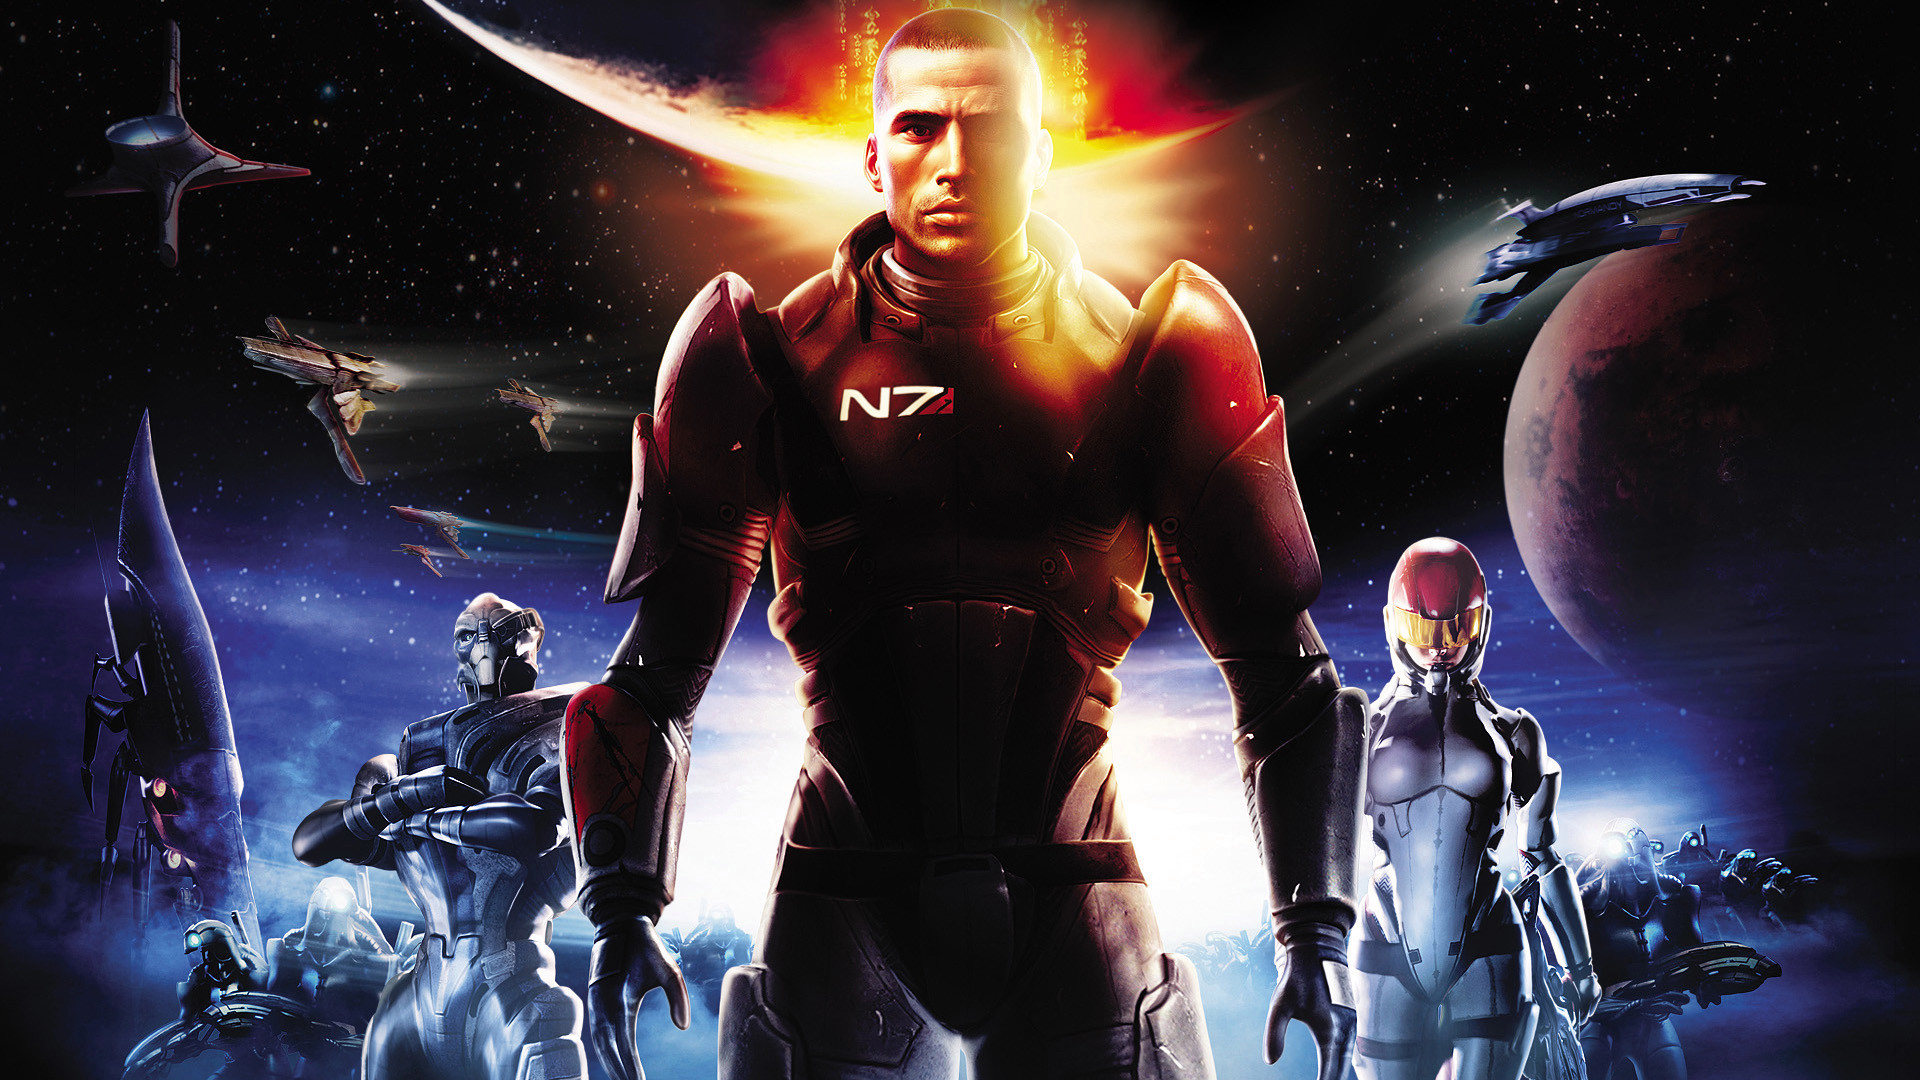 Mass Effect Trilogy Remastered listed